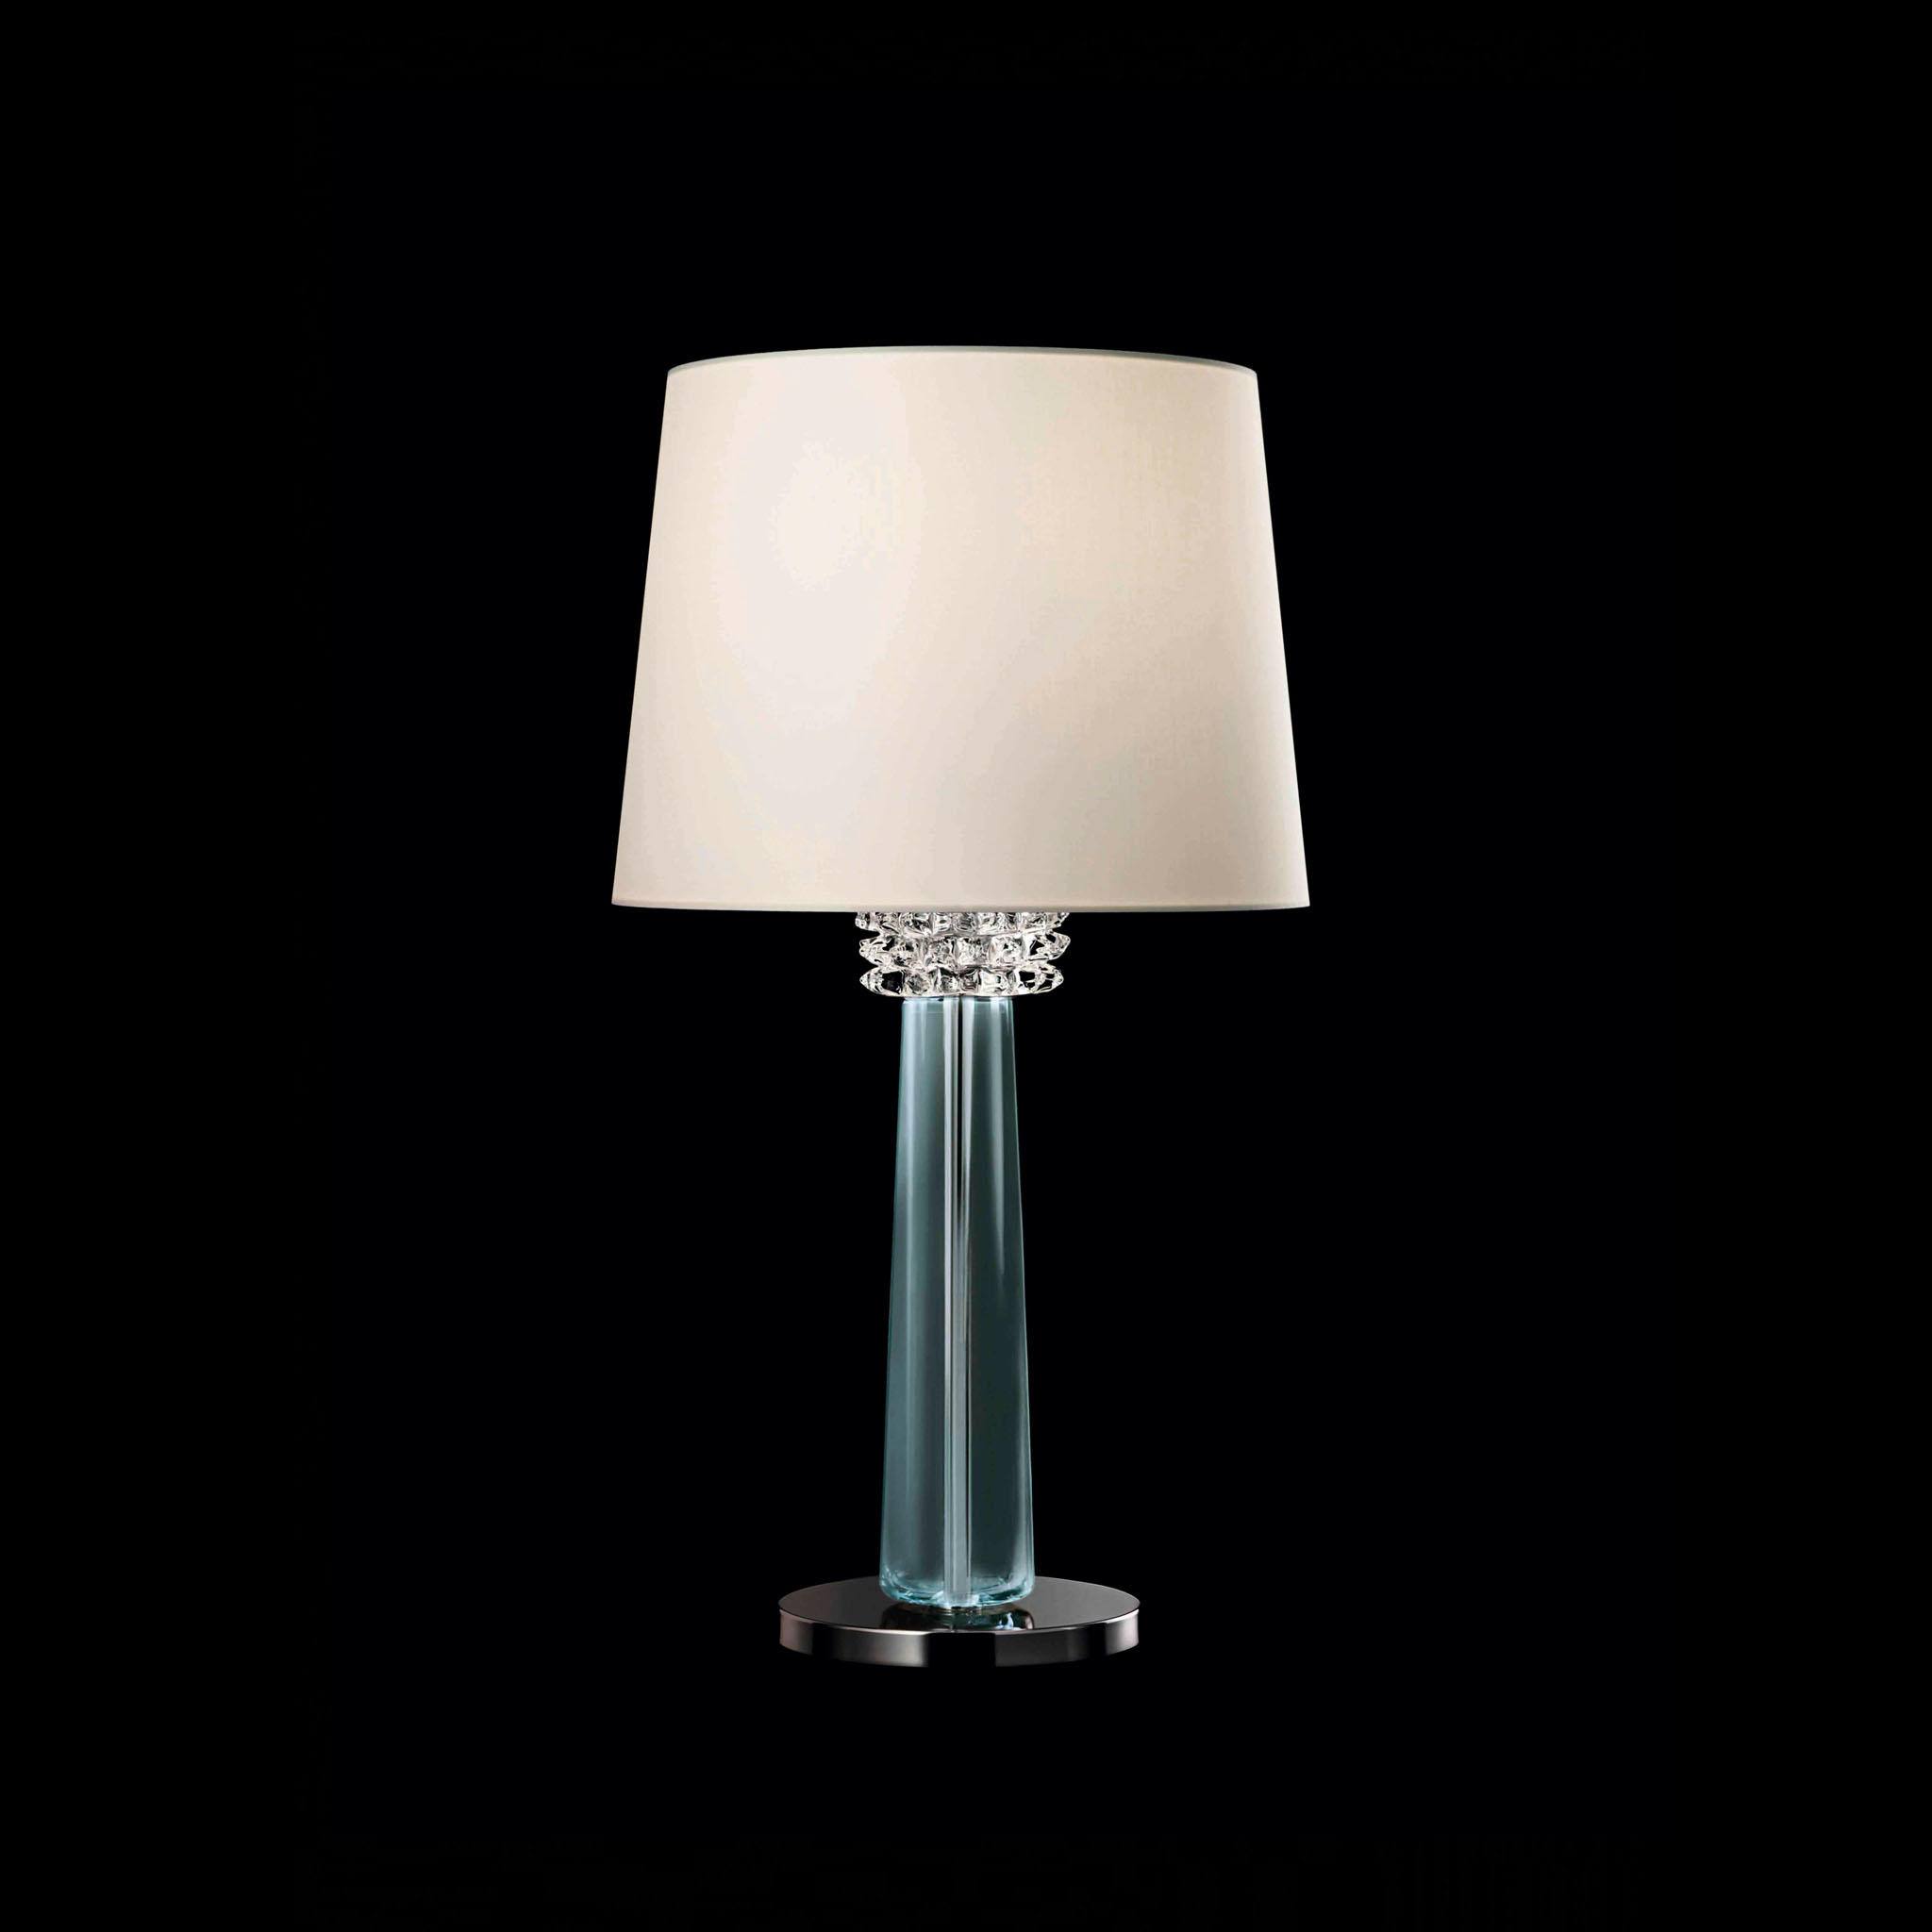 Amsterdam Table Lamp_Barovier&Toso_01